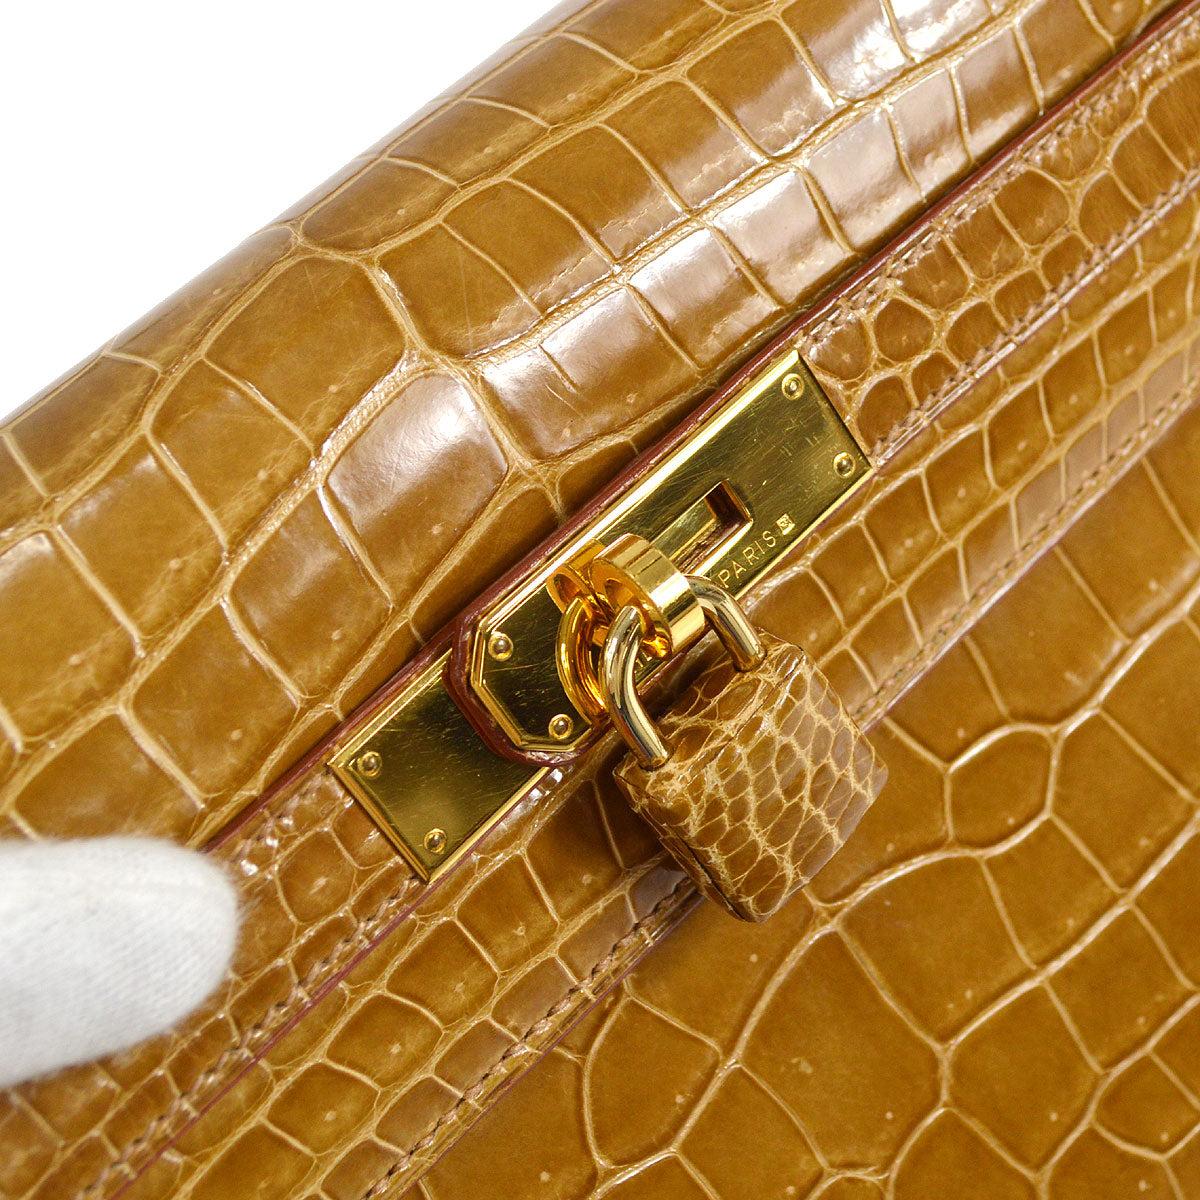 Pre-Owned Vintage Condition
From 1997 Collection
Porosus Crocodile  
Gold Hardware
Includes Clochette, Keys, Padlock, Rain Cover, Dust Bag
W 13.0 